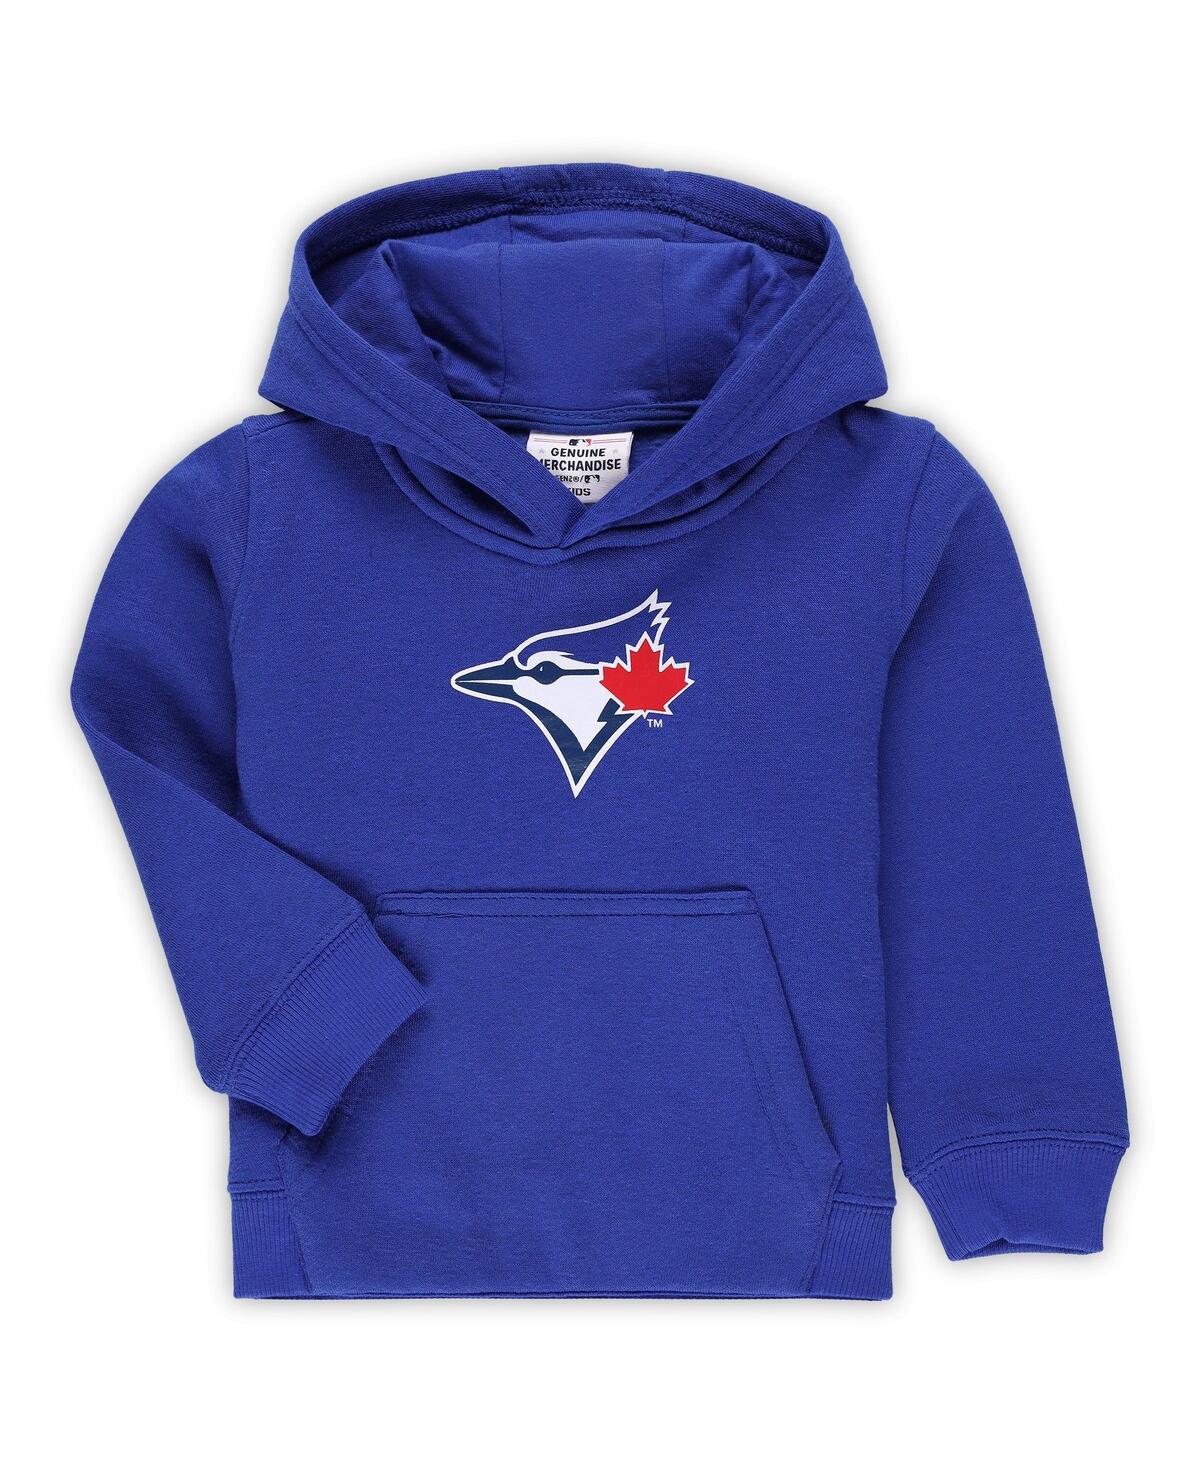 Outerstuff Babies' Toddler Boys And Girls Royal Toronto Blue Jays Team Primary Logo Fleece Pullover Hoodie